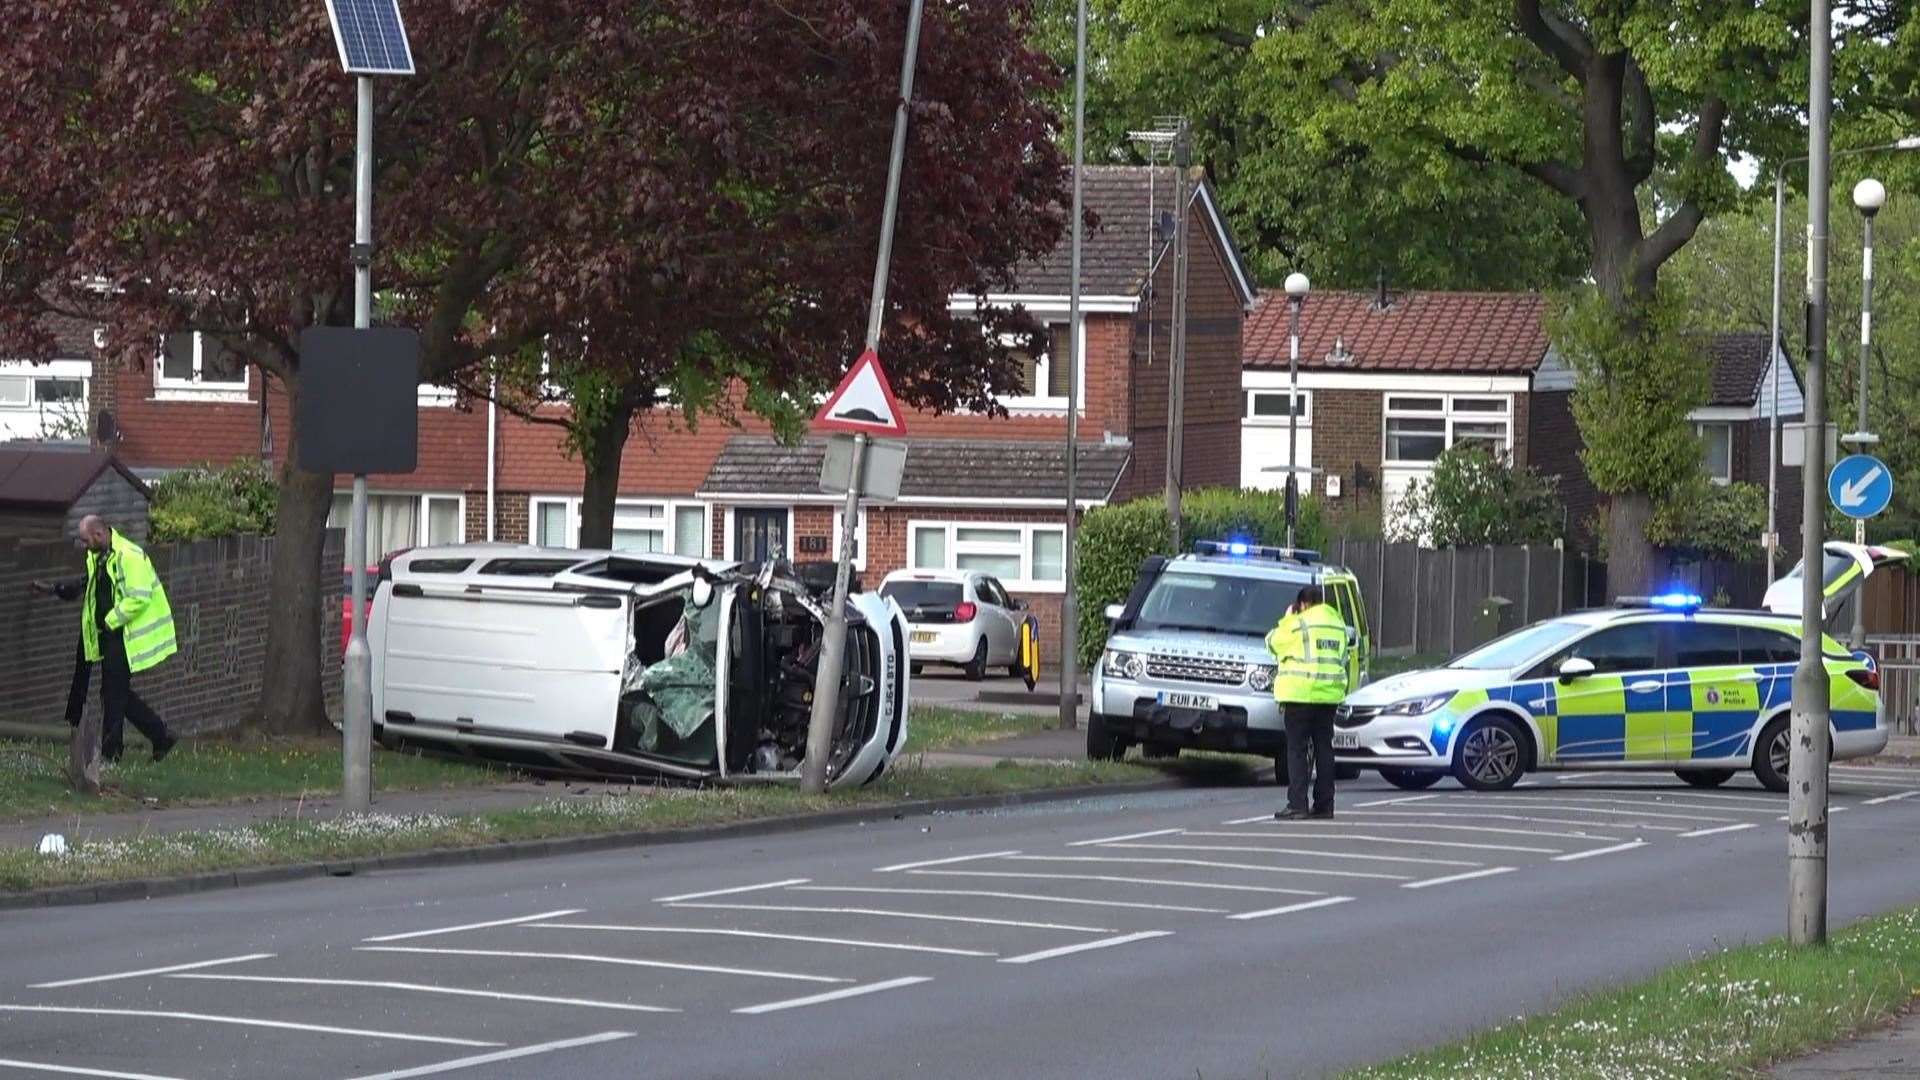 The van has overturned in Deanwood Drive in Chatham. Picture: @Media999E